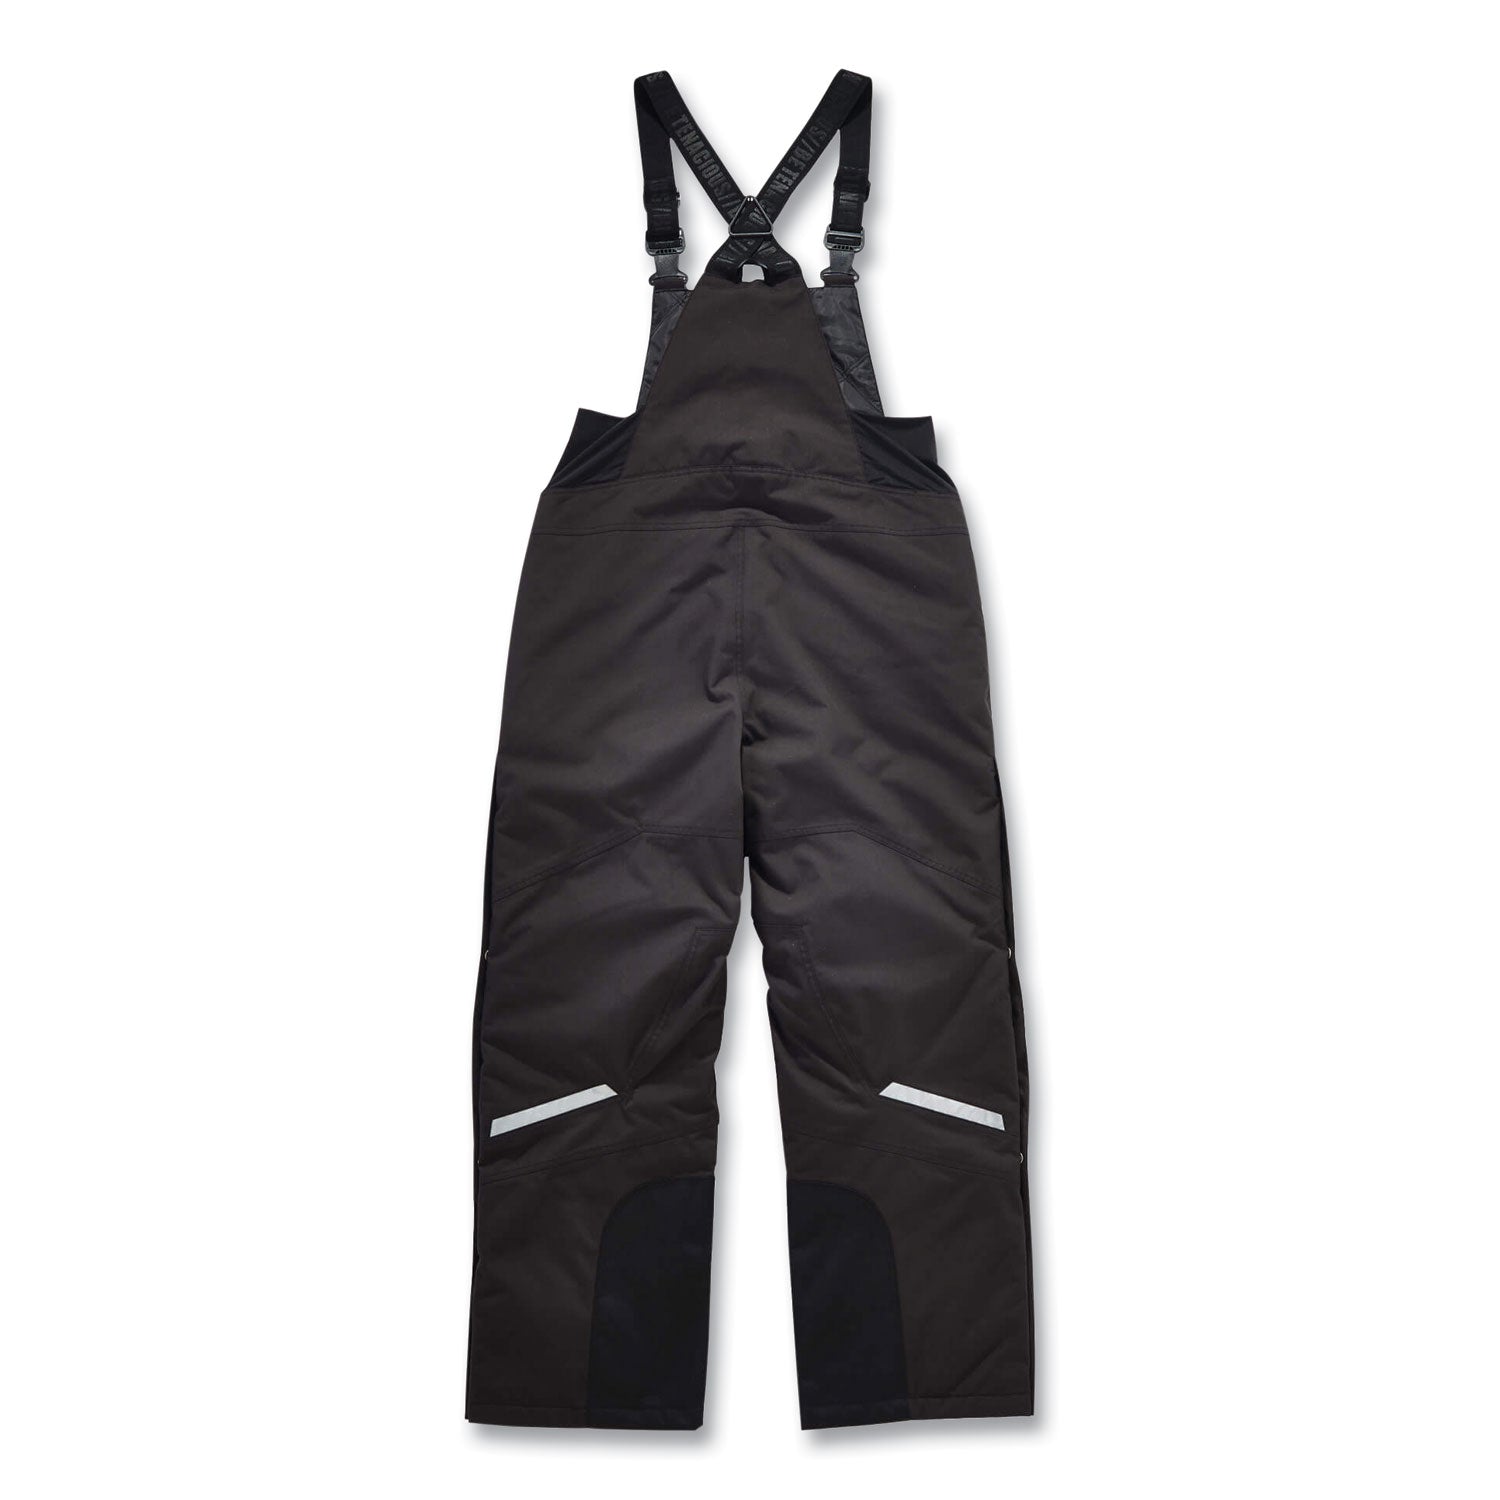 n-ferno-6471-thermal-bibs-with-500d-nylon-shell-medium-black-ships-in-1-3-business-days_ego41213 - 2